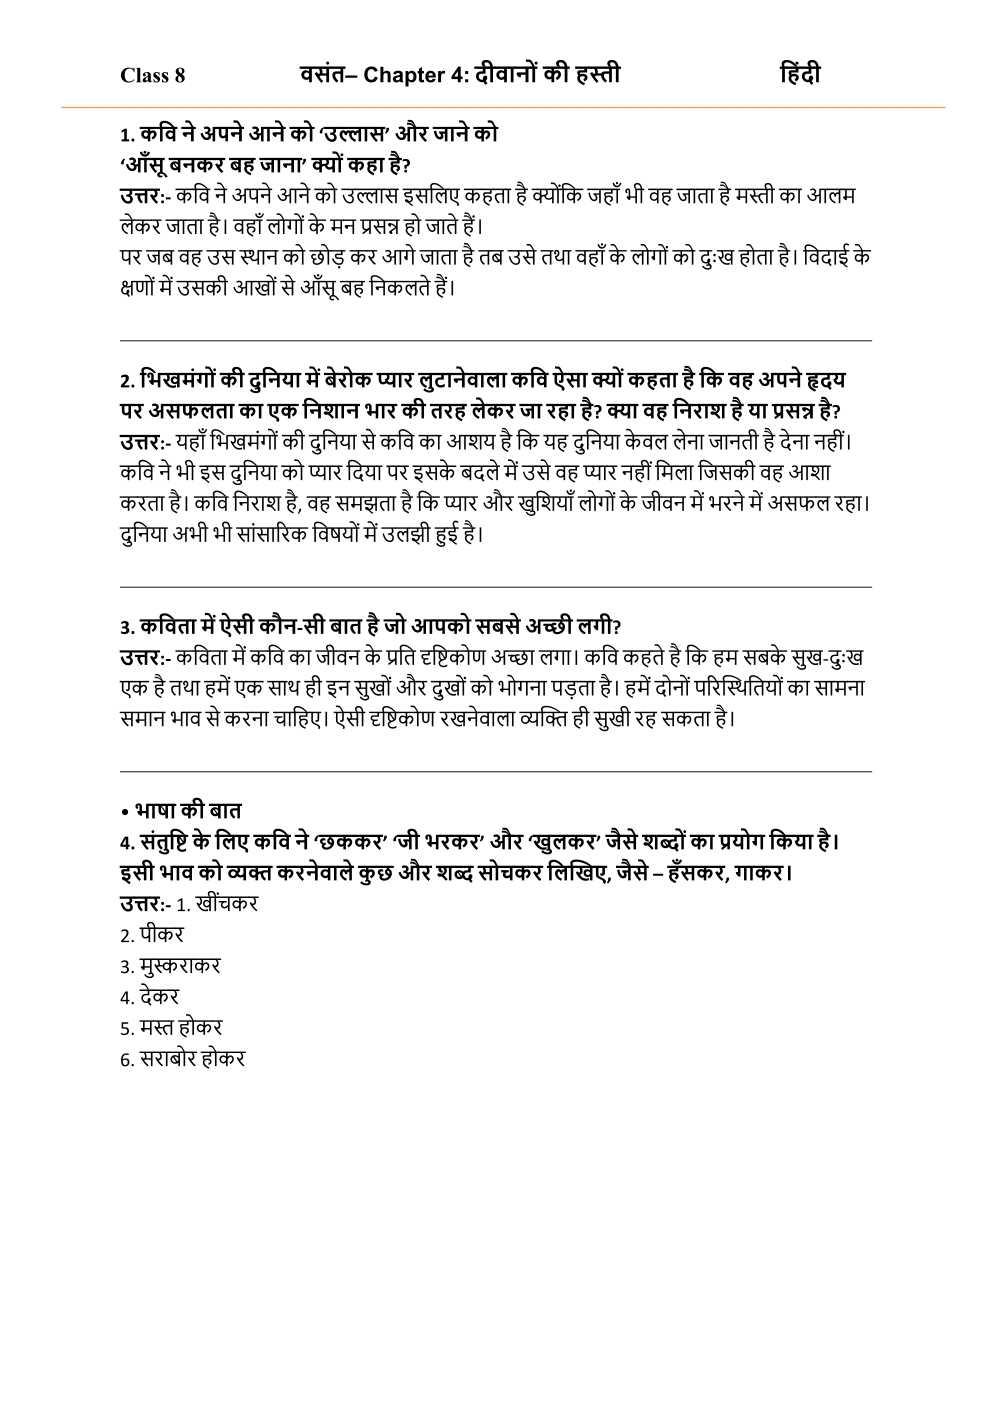 NCERT Solutions For Class 8 Hindi Vasant Chapter 4